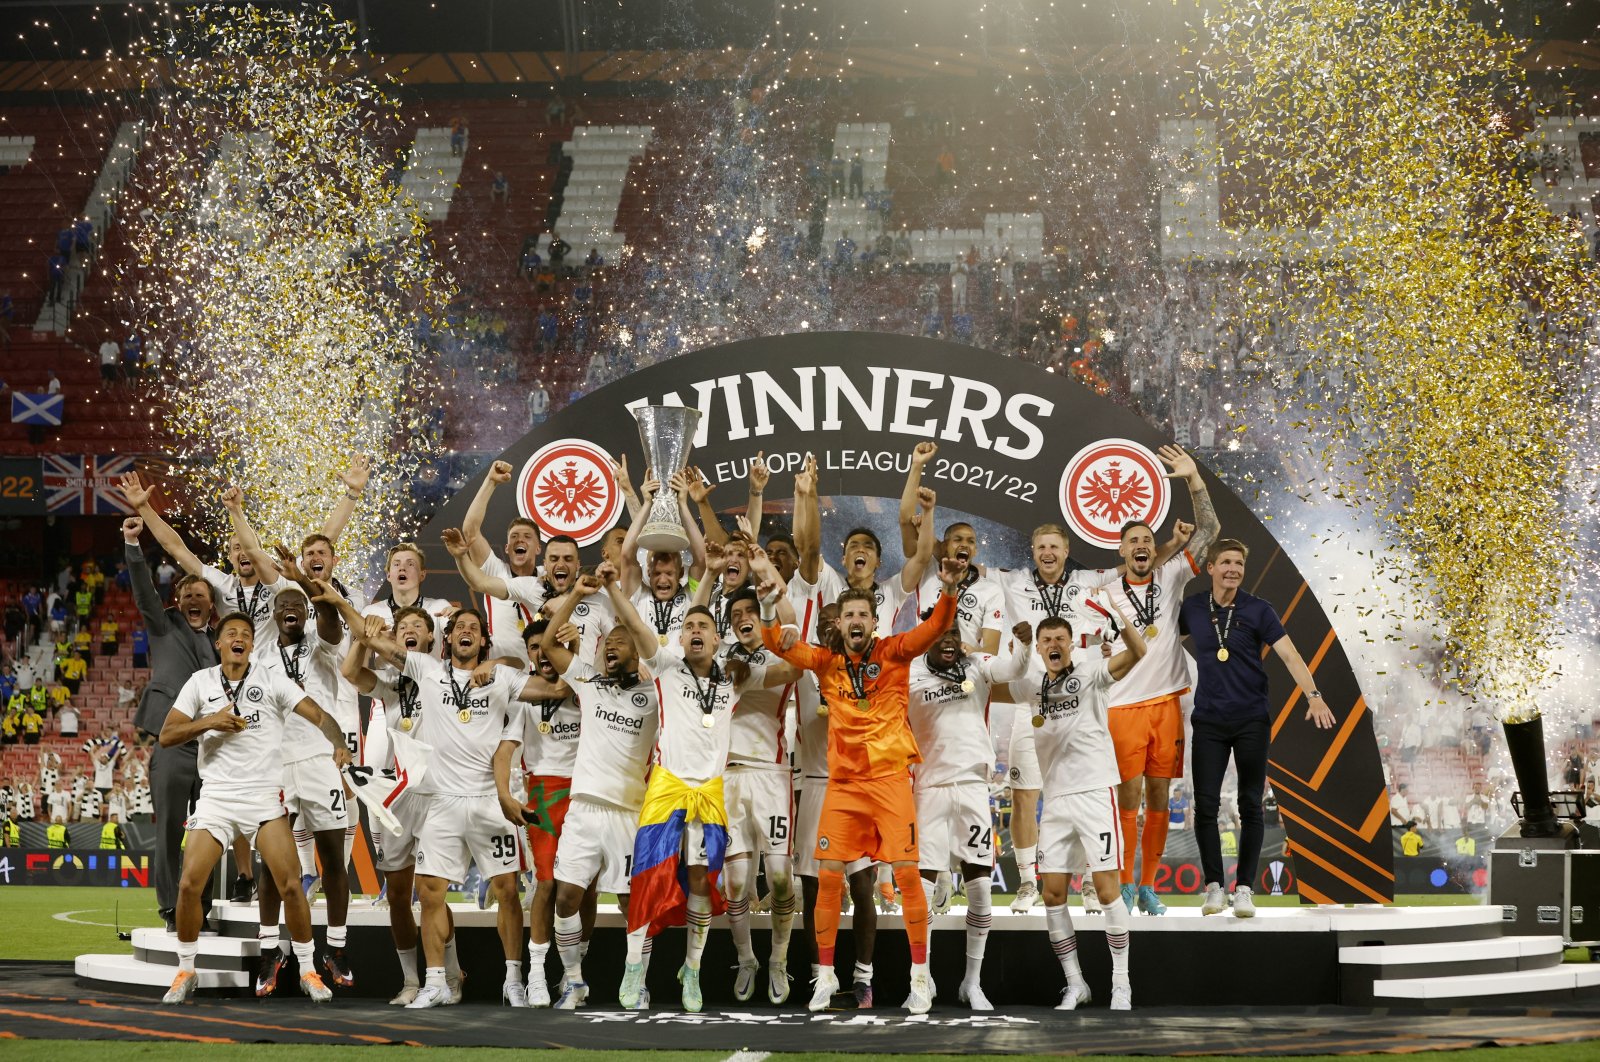 Eintracht Frankfurt&#039;s Sebastian Rode lifts the trophy as his team celebrates after winning the UEFA Europa League in the final match against Glasgow Rangers at the Ramon Sanchez Pizjuan Stadium in, Seville, Spain, on May 18, 2022. (Reuters Photo)